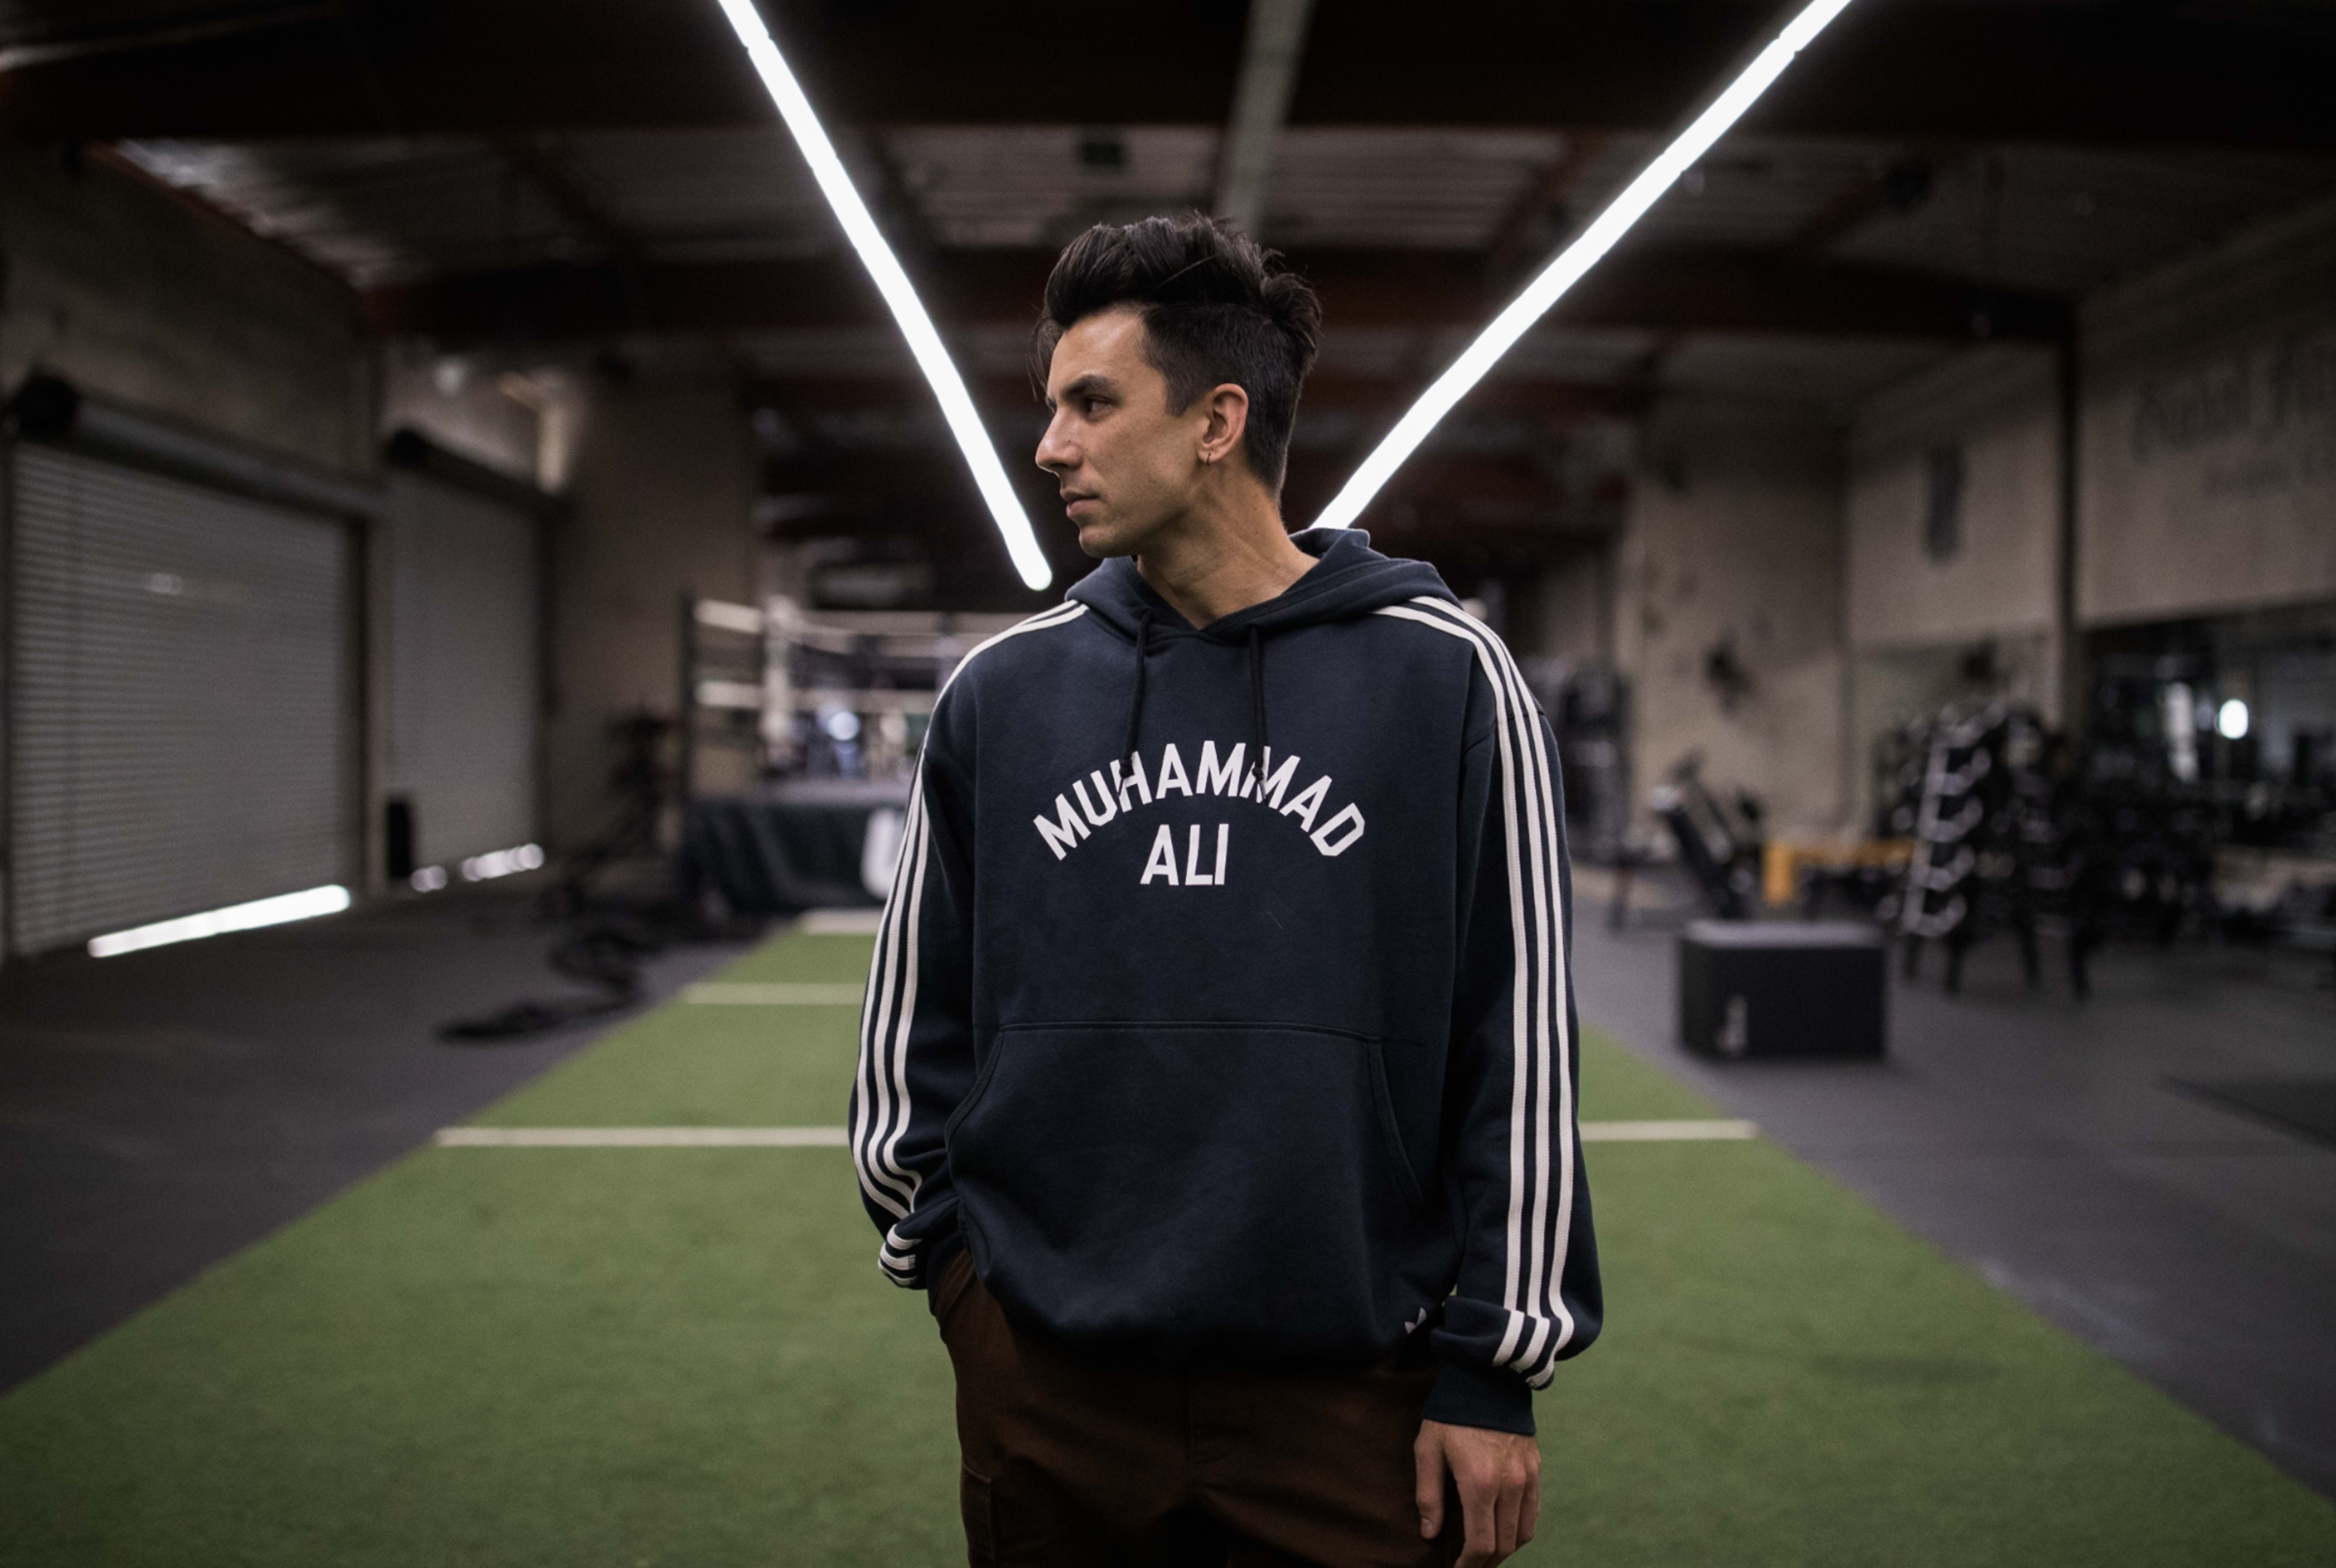 A man wearing a hoodie poses for a fitness photoshoot in the gym.